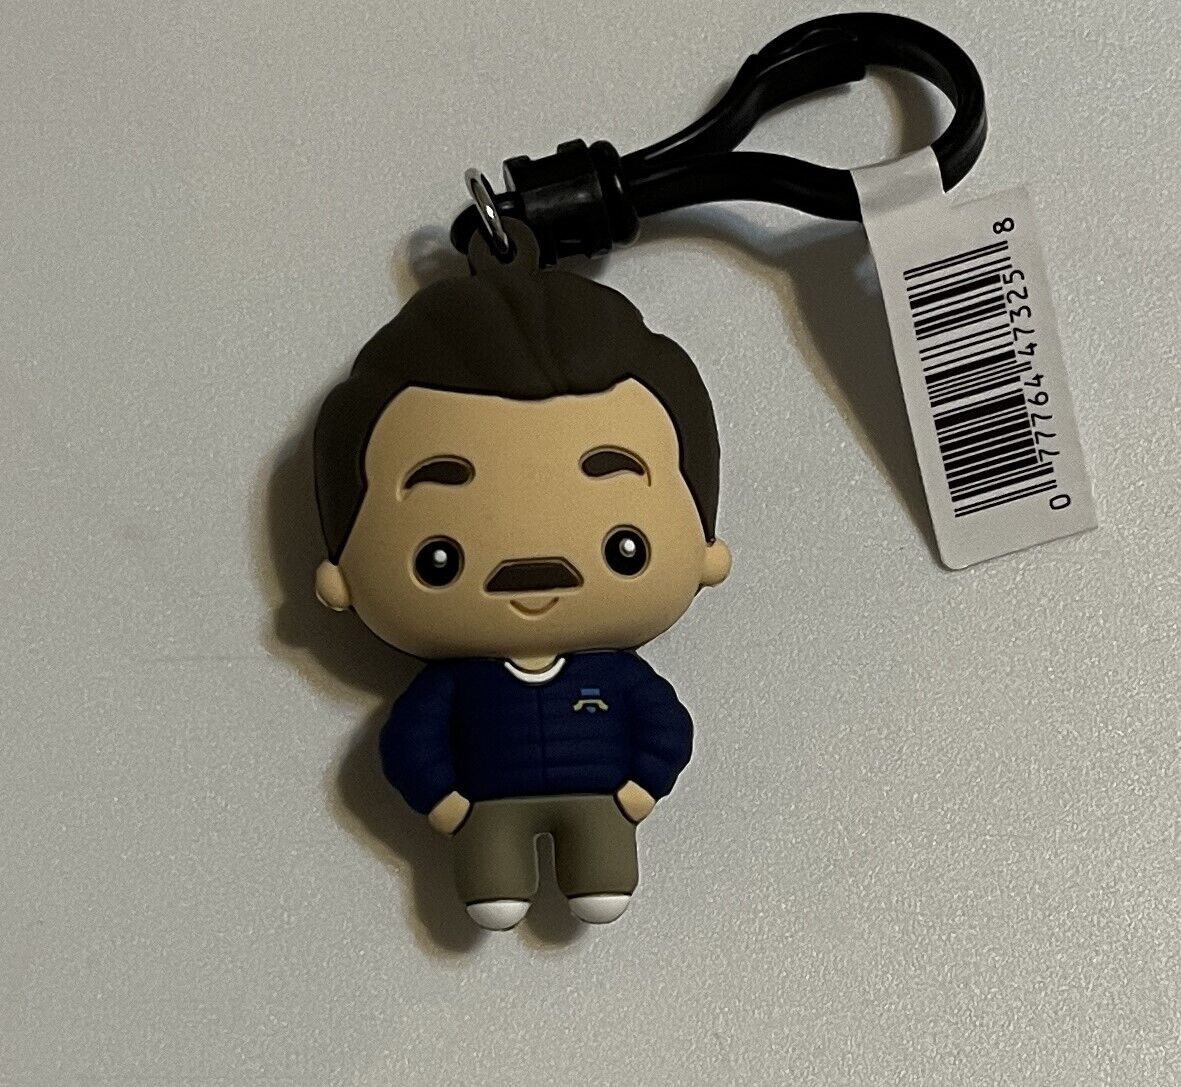 Monogram Ted Lasso Series 2 Figural Bag Clip - Buy3+=Free Shipping